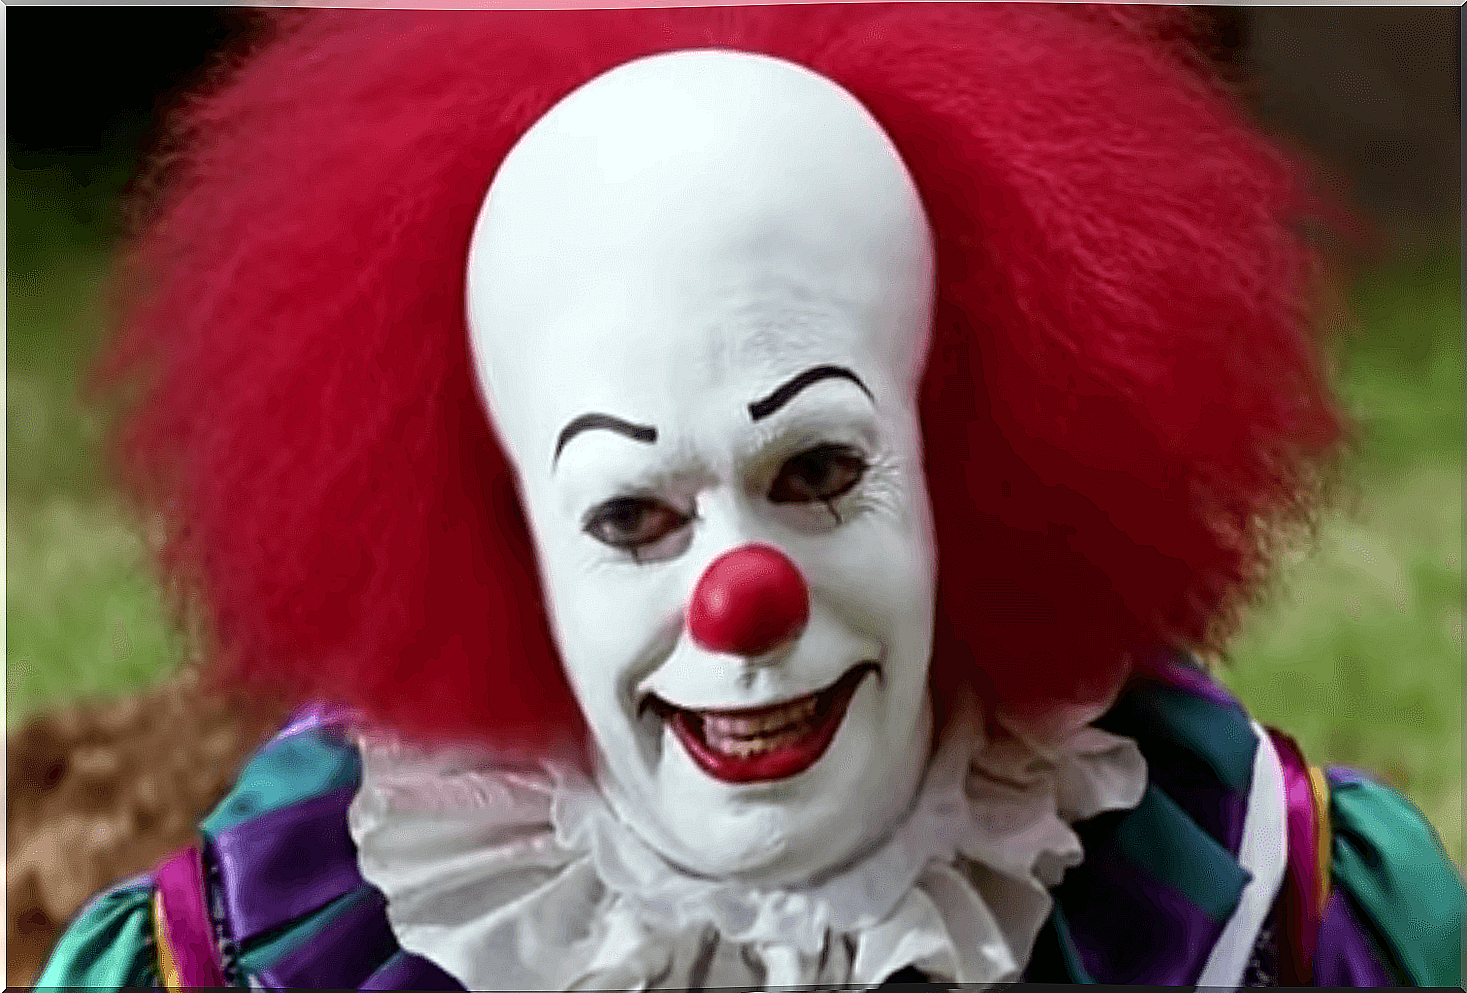 Coulrophobia: why is there a phobia of clowns?